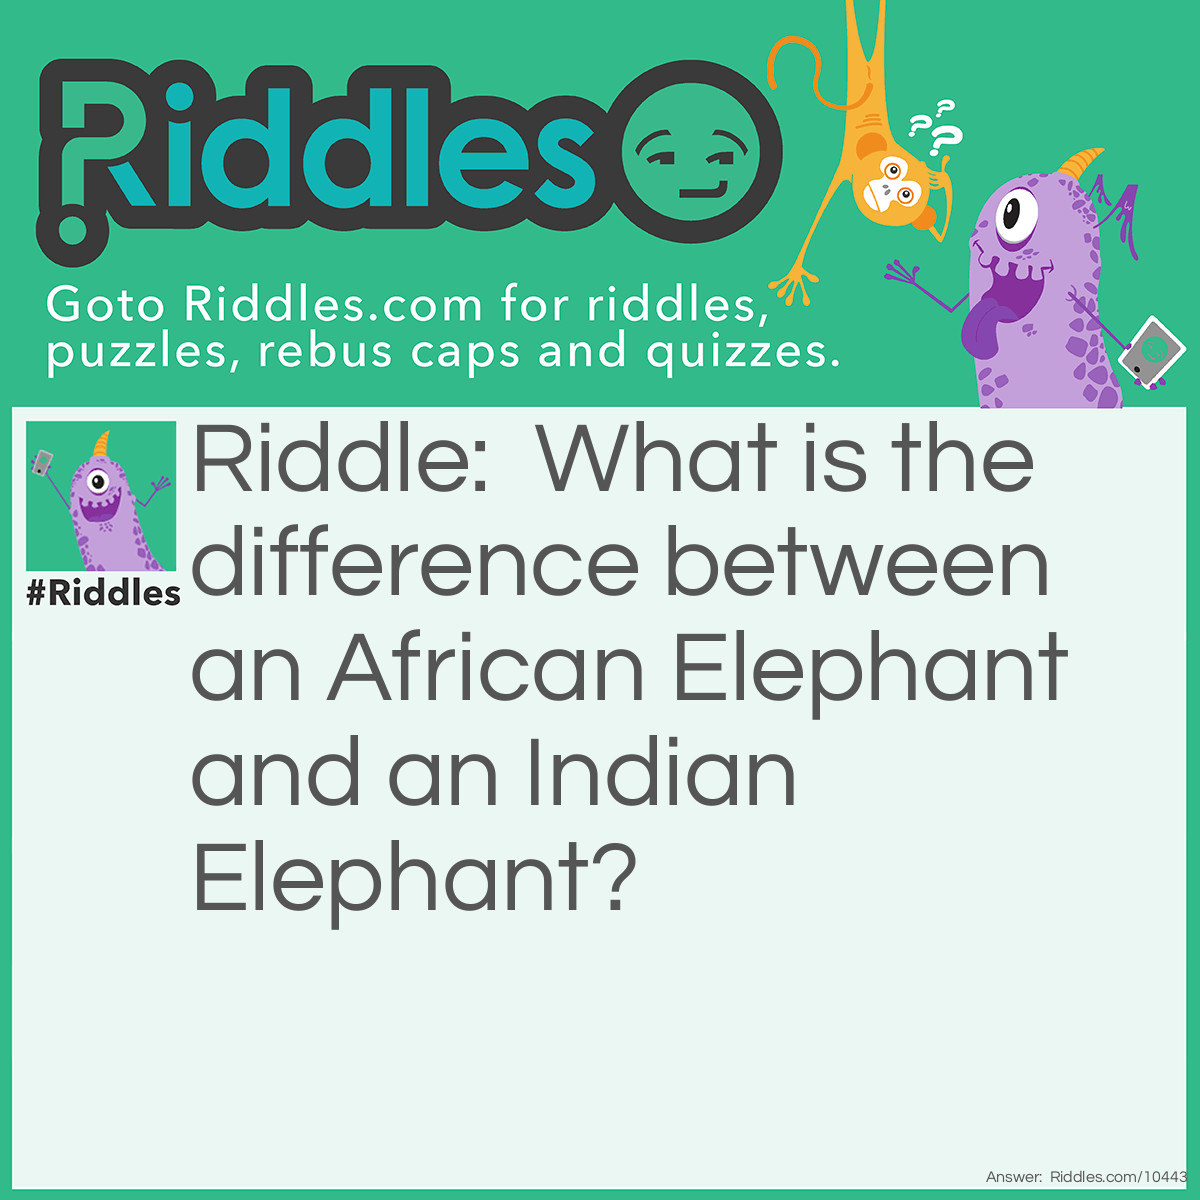 Riddle: What is the difference between an African Elephant and an Indian Elephant? Answer: About 3,000 miles.